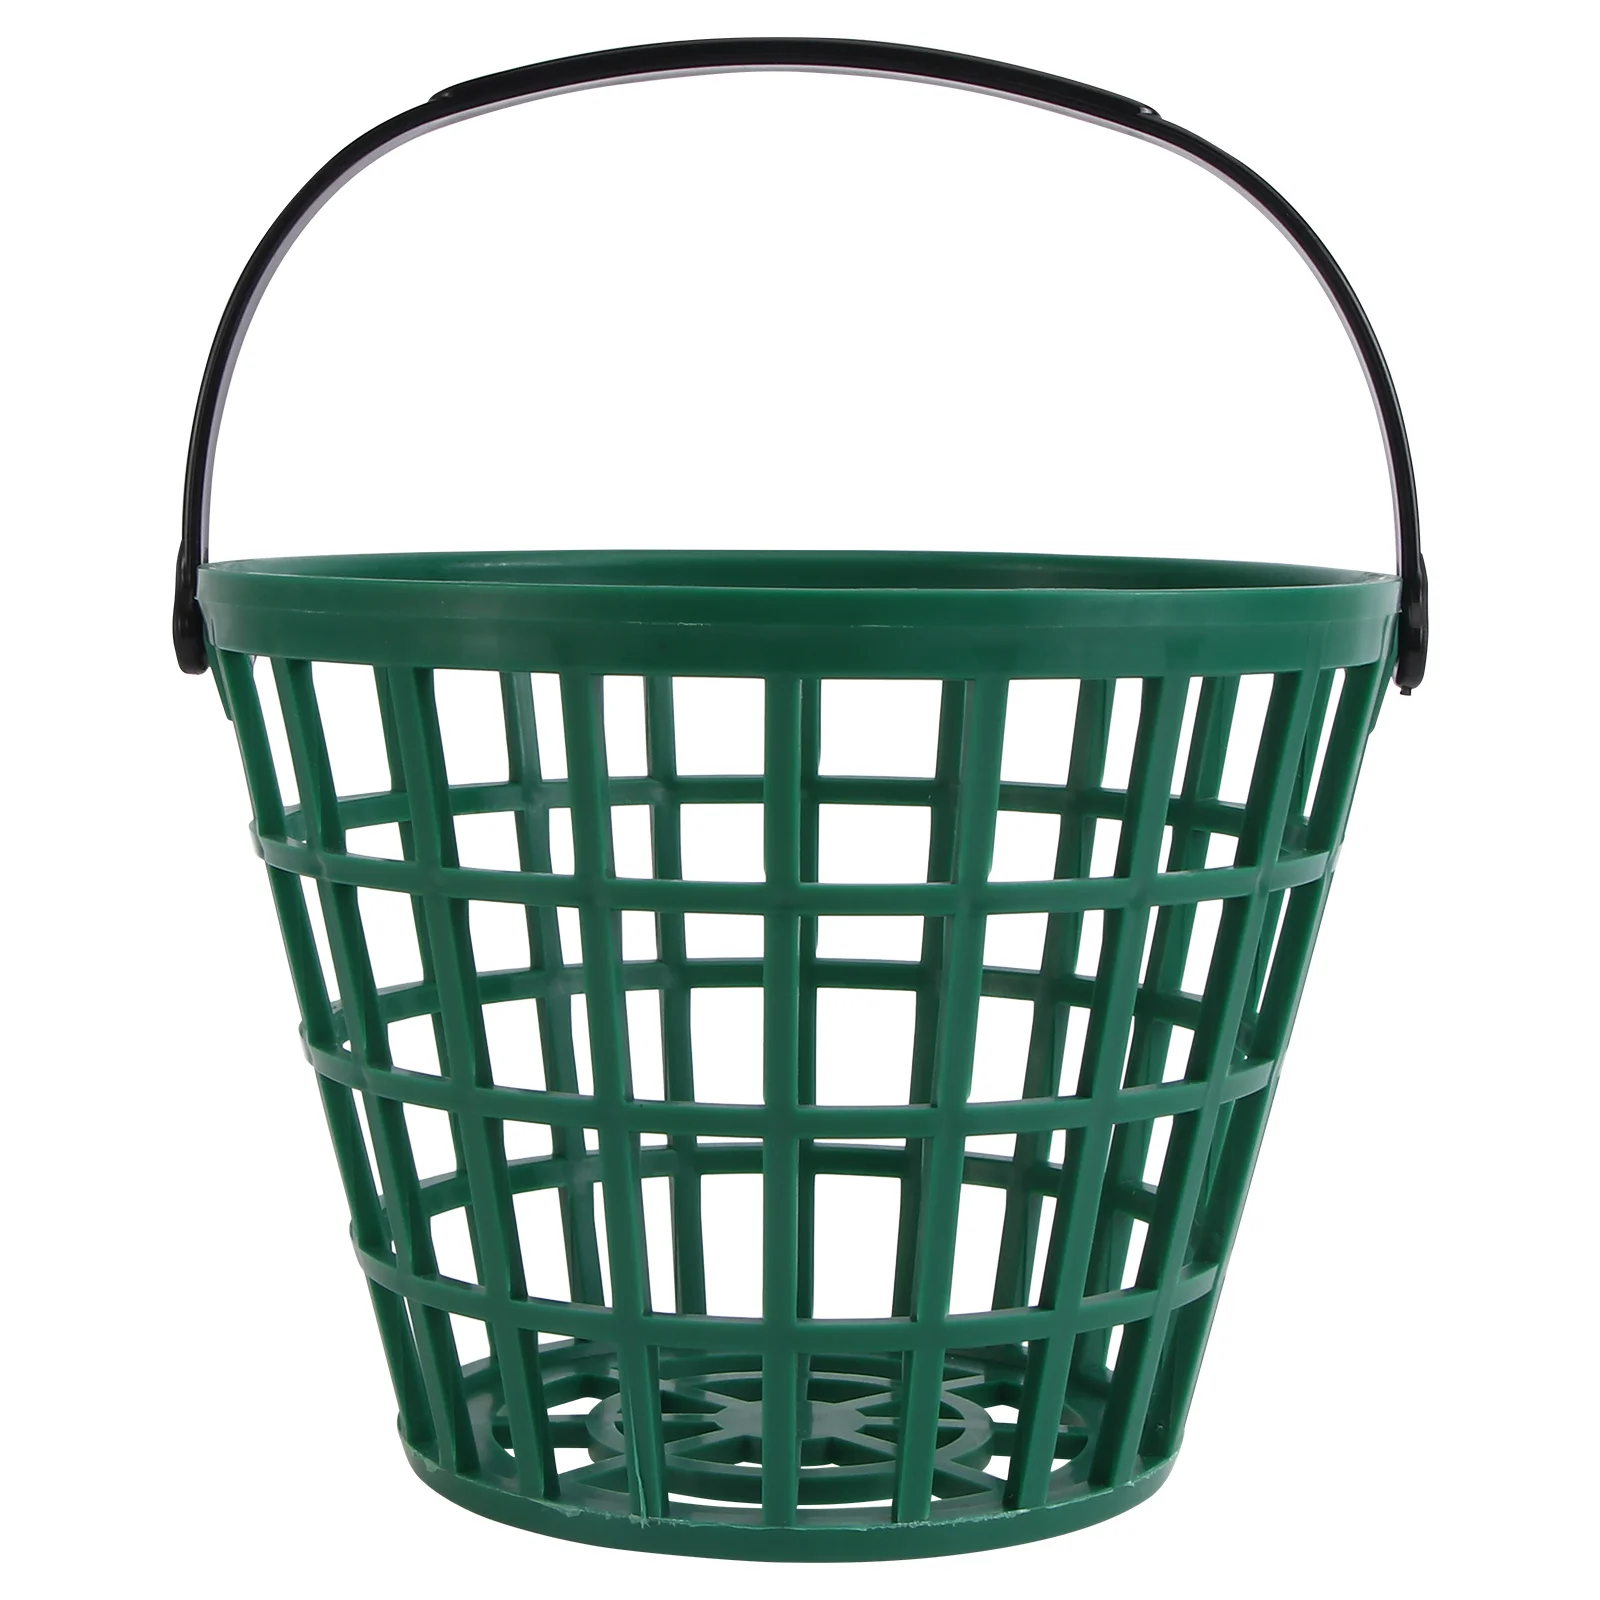 

Ball Basket Golfball Container with Handle Ball Holder Contain Stadium Accessories (Green, Can Pack 50pcs)